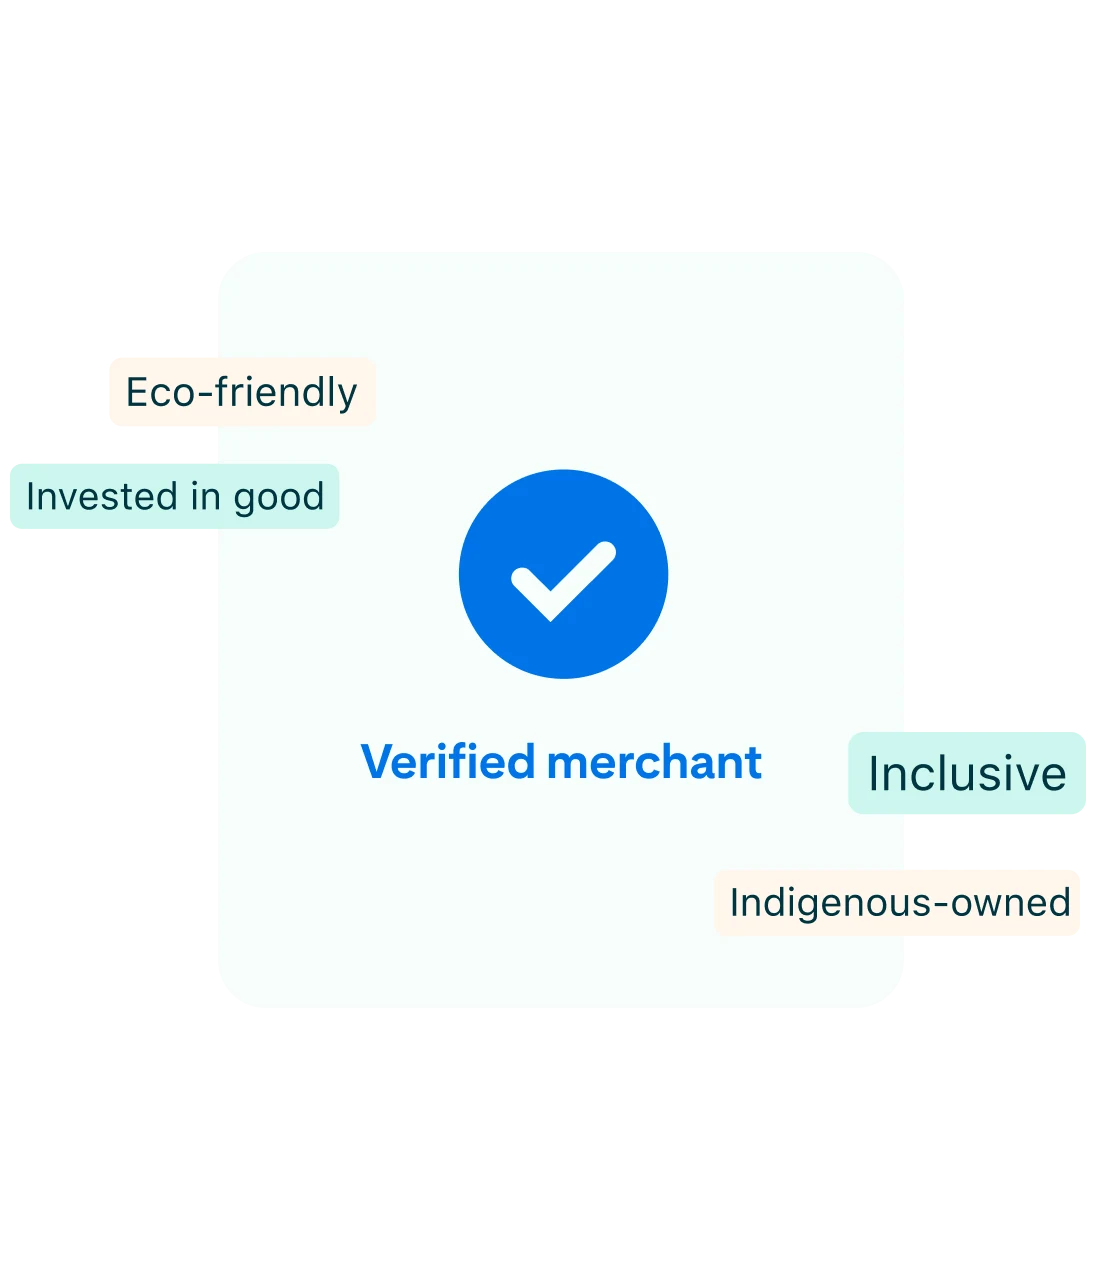 Image of Pinterest's verified merchant logo, surrounded by phrases on the left and right of the logo. To the left, from top to bottom, read the phrases "Eco-friendly" and "Invested in good." To the right, from top to bottom, read the phrases "Inclusive" and "Indigenous-owned."